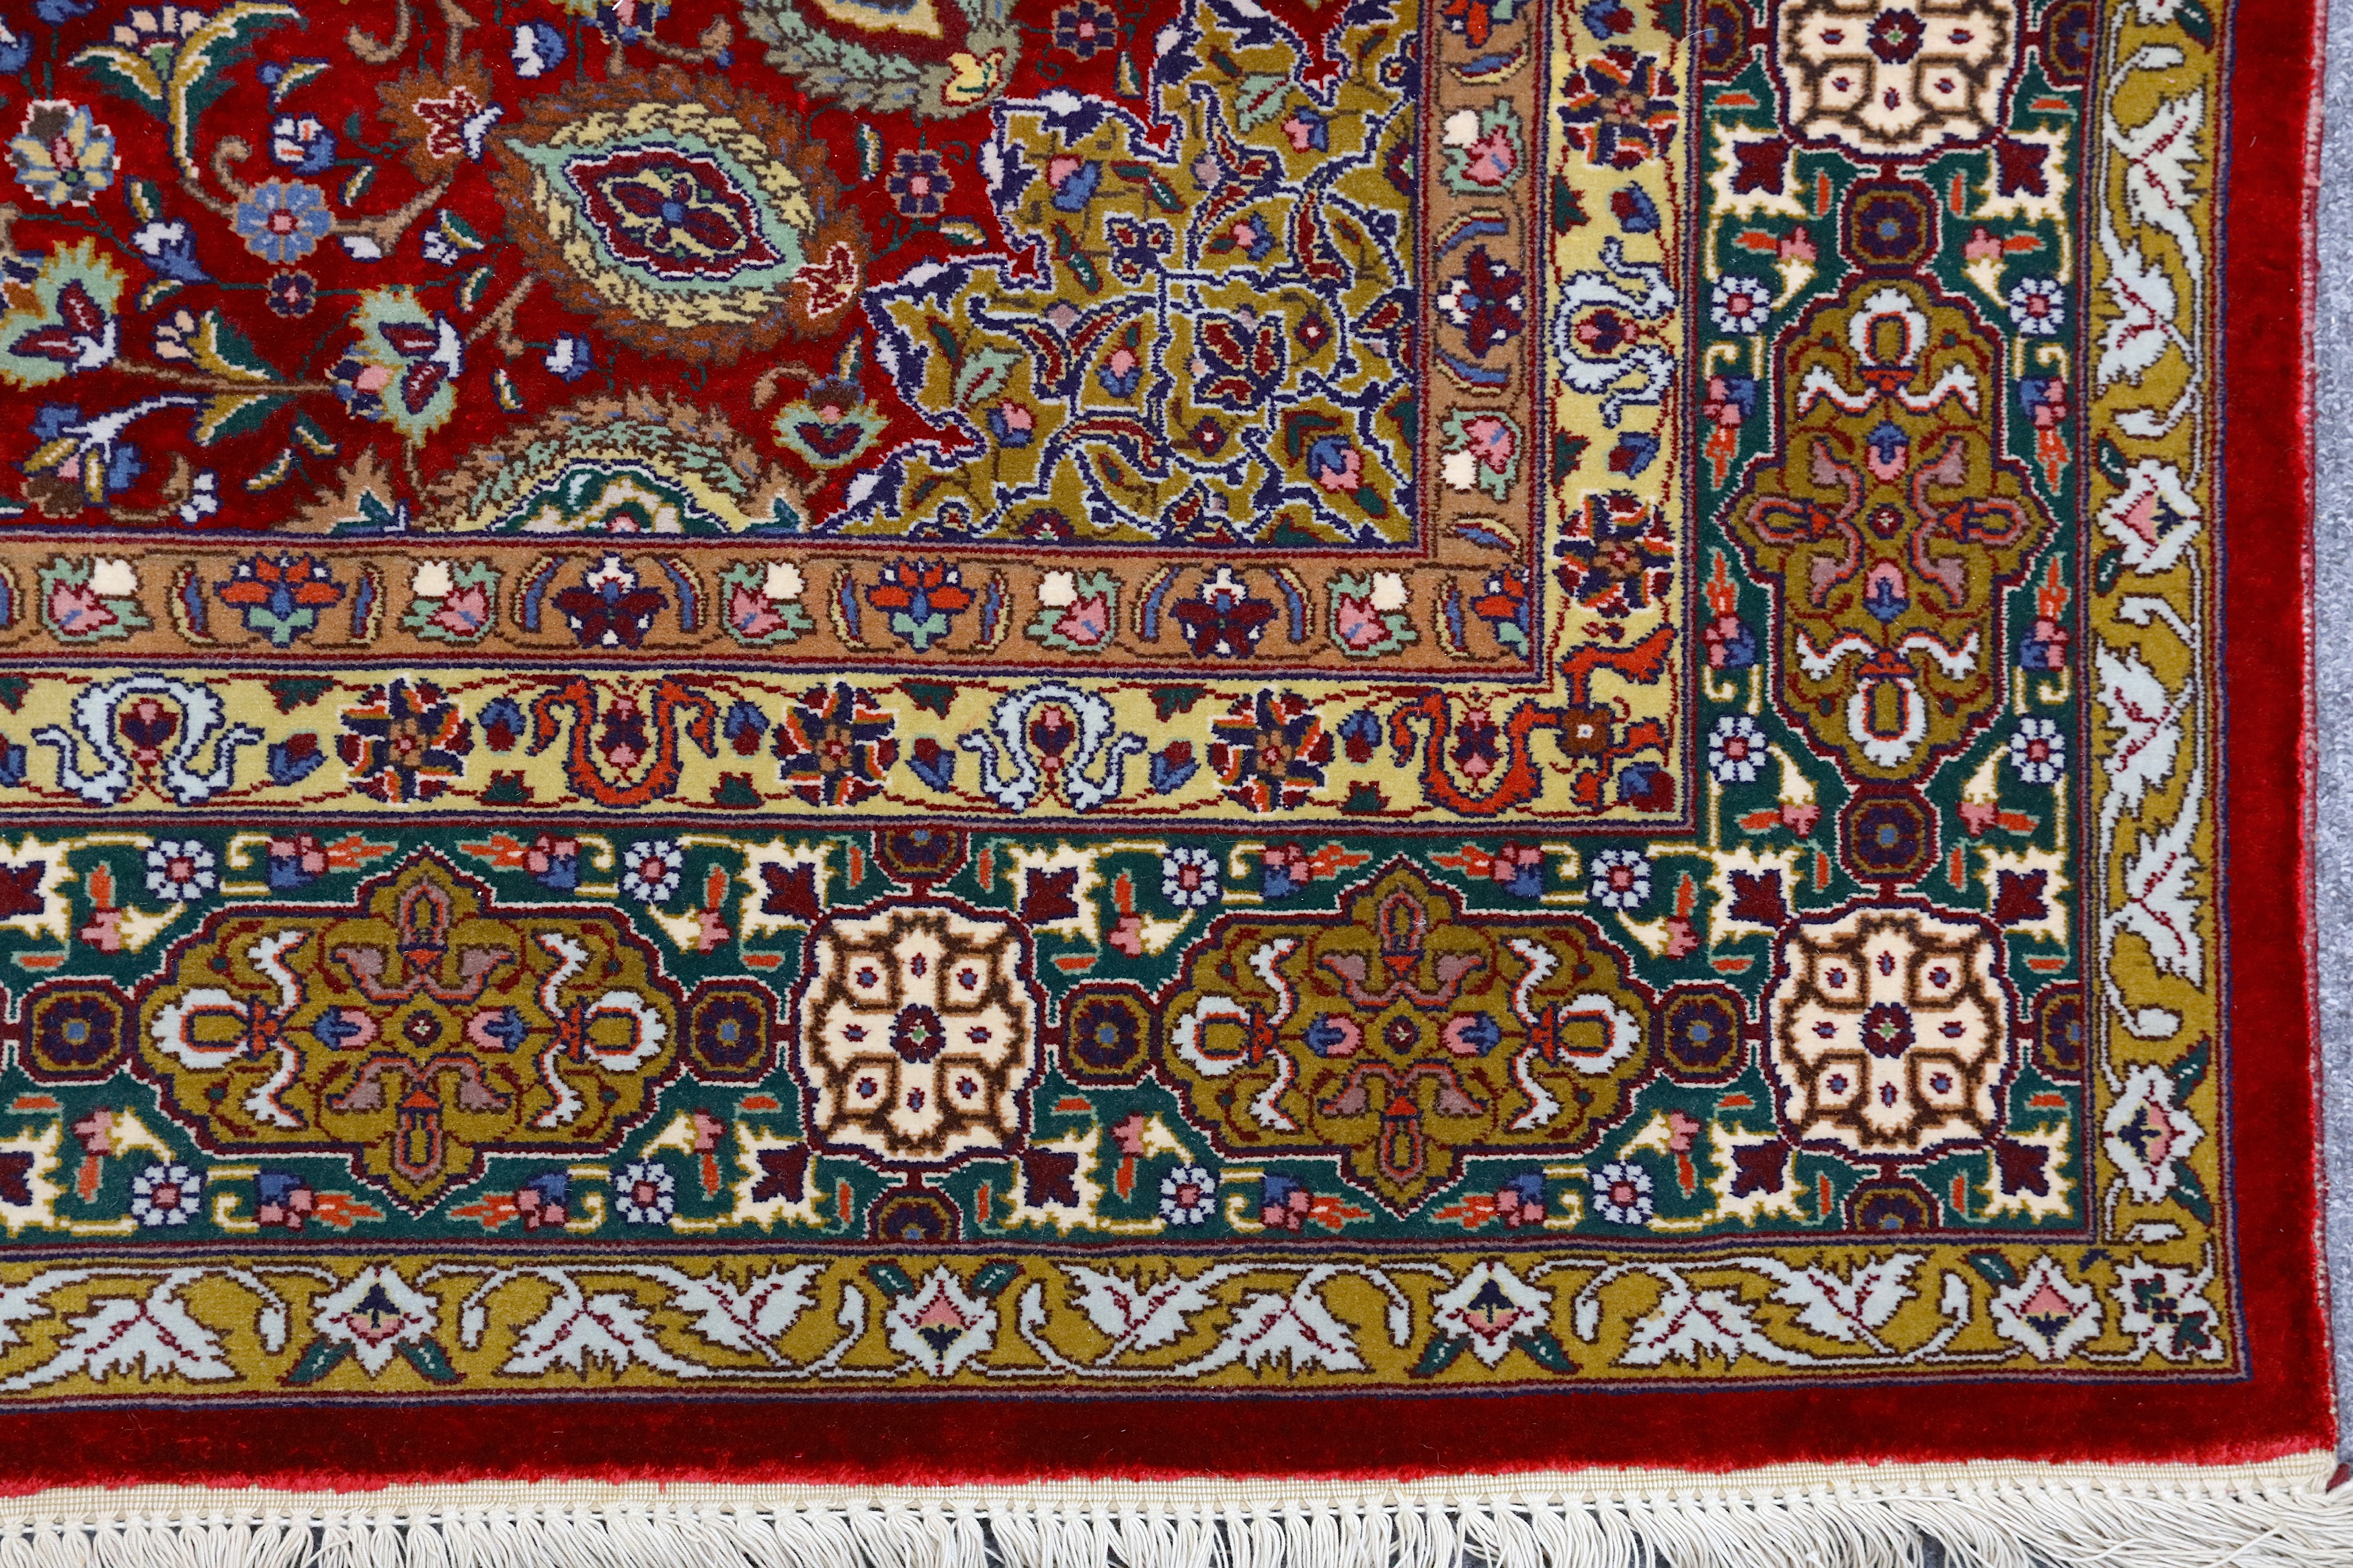 A PAIR OF VERY FINE PART SILK TABRIZ RUGS, NORTH-WEST PERSIA - Image 11 of 12